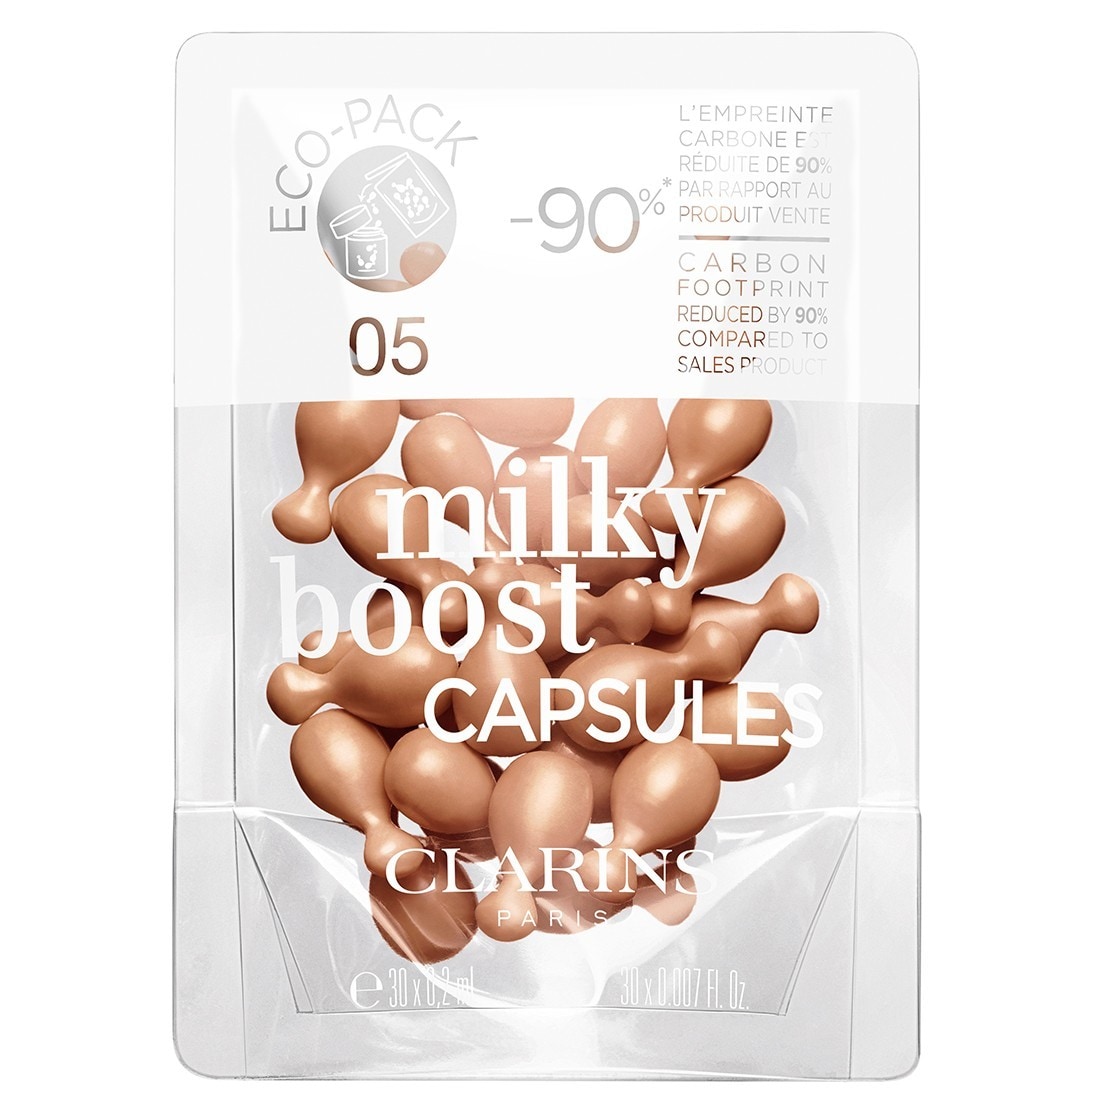 Clarins Milky Boost Capsules Refill, 05